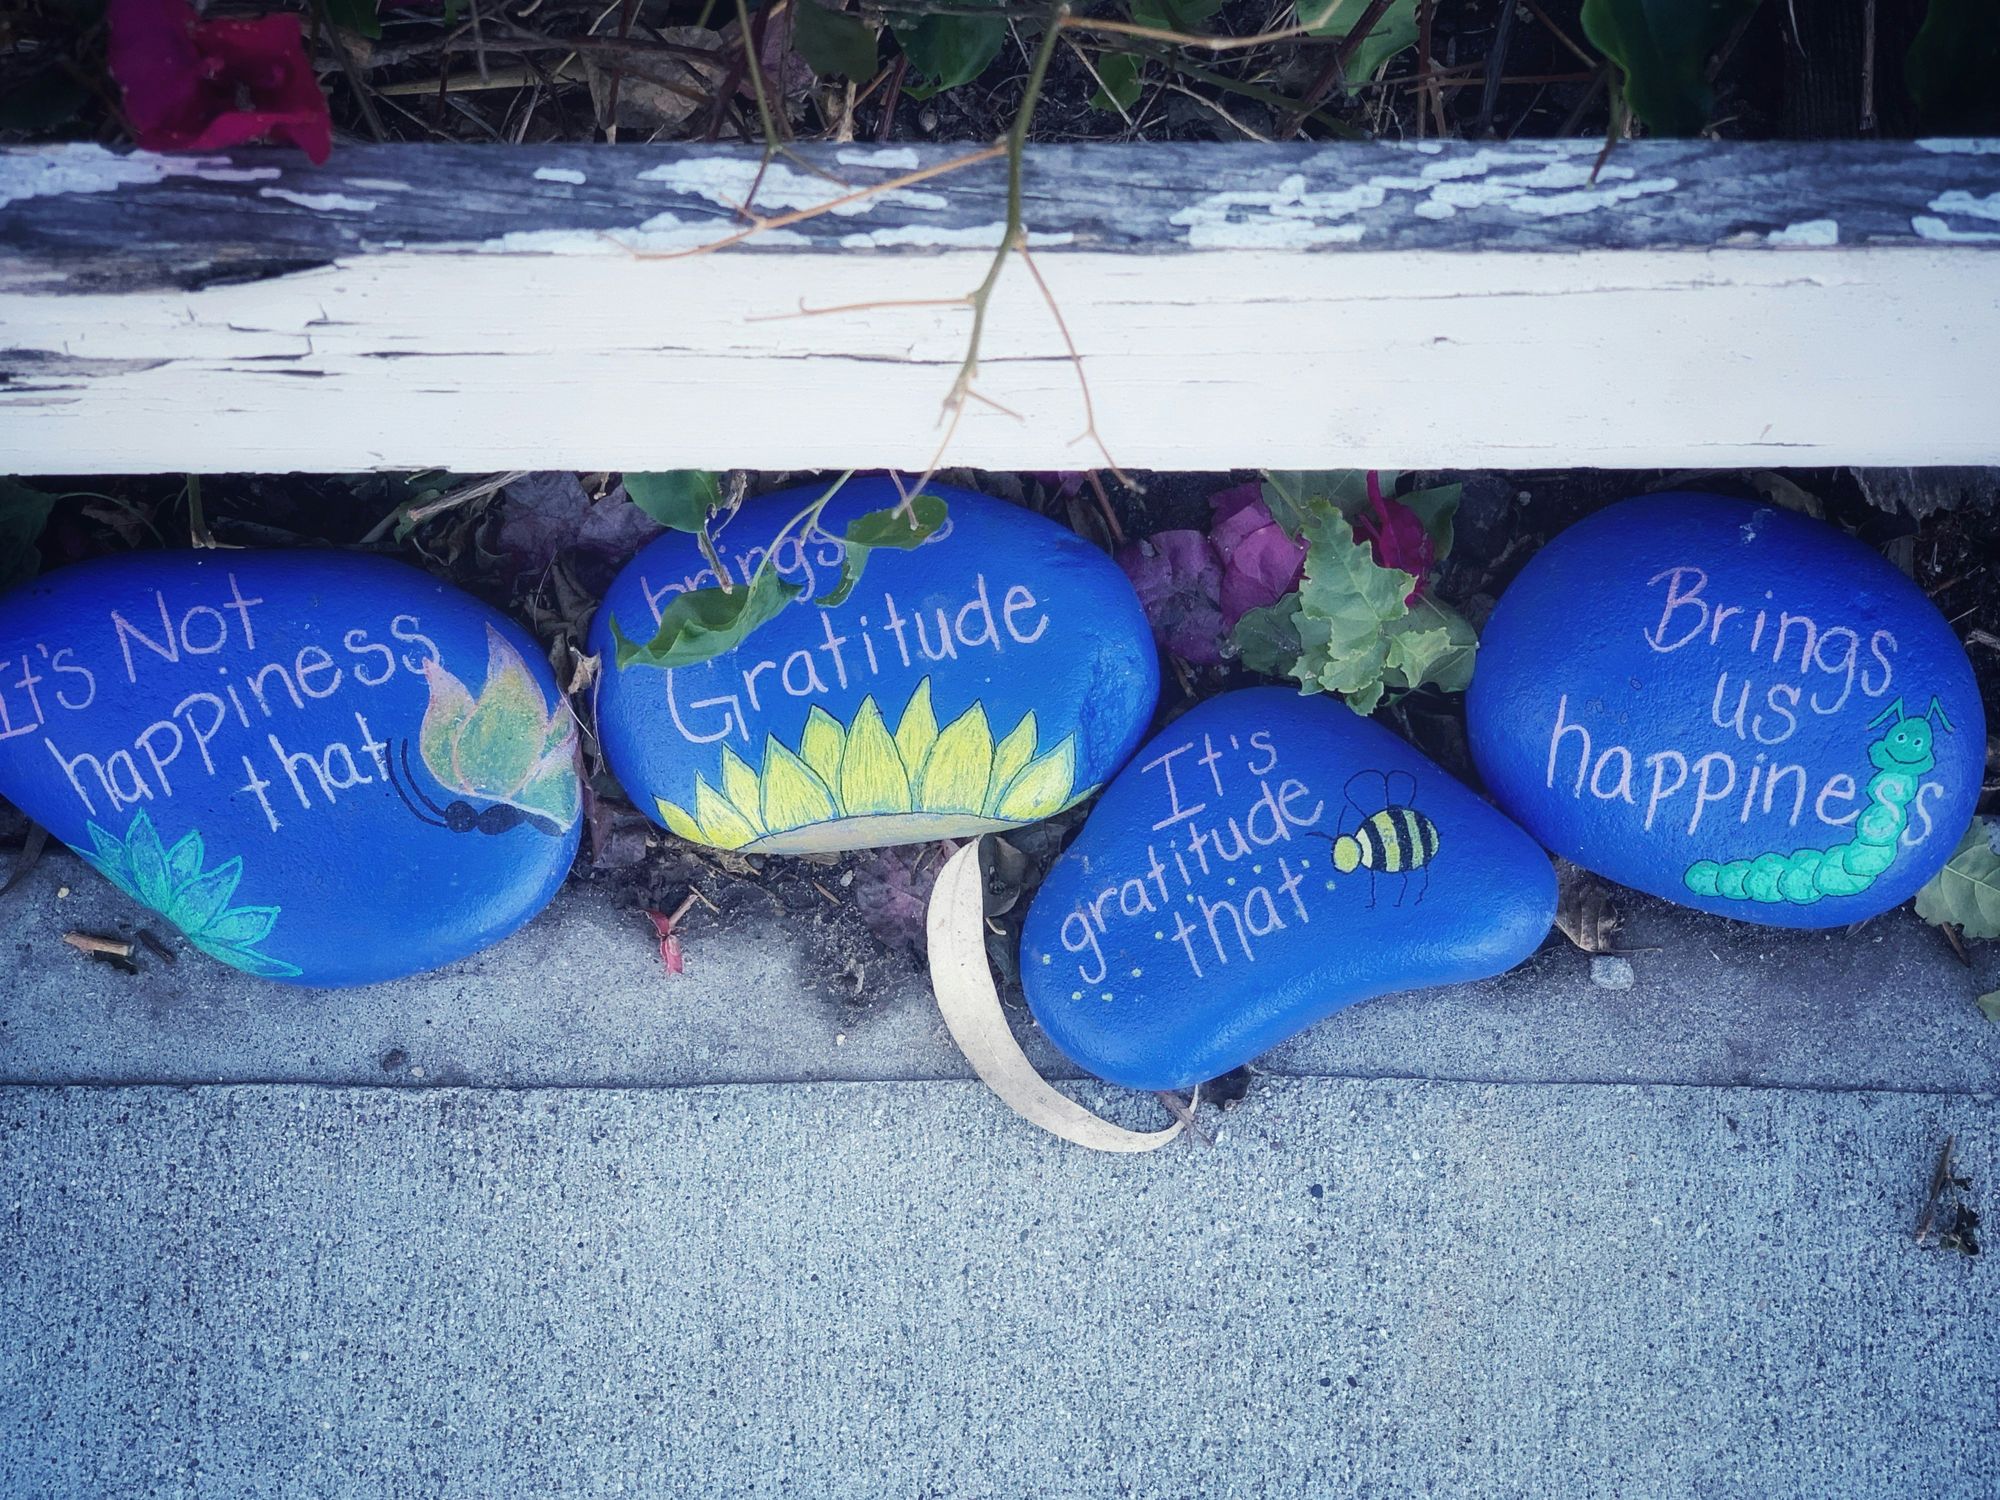 painted rocks with words written on them